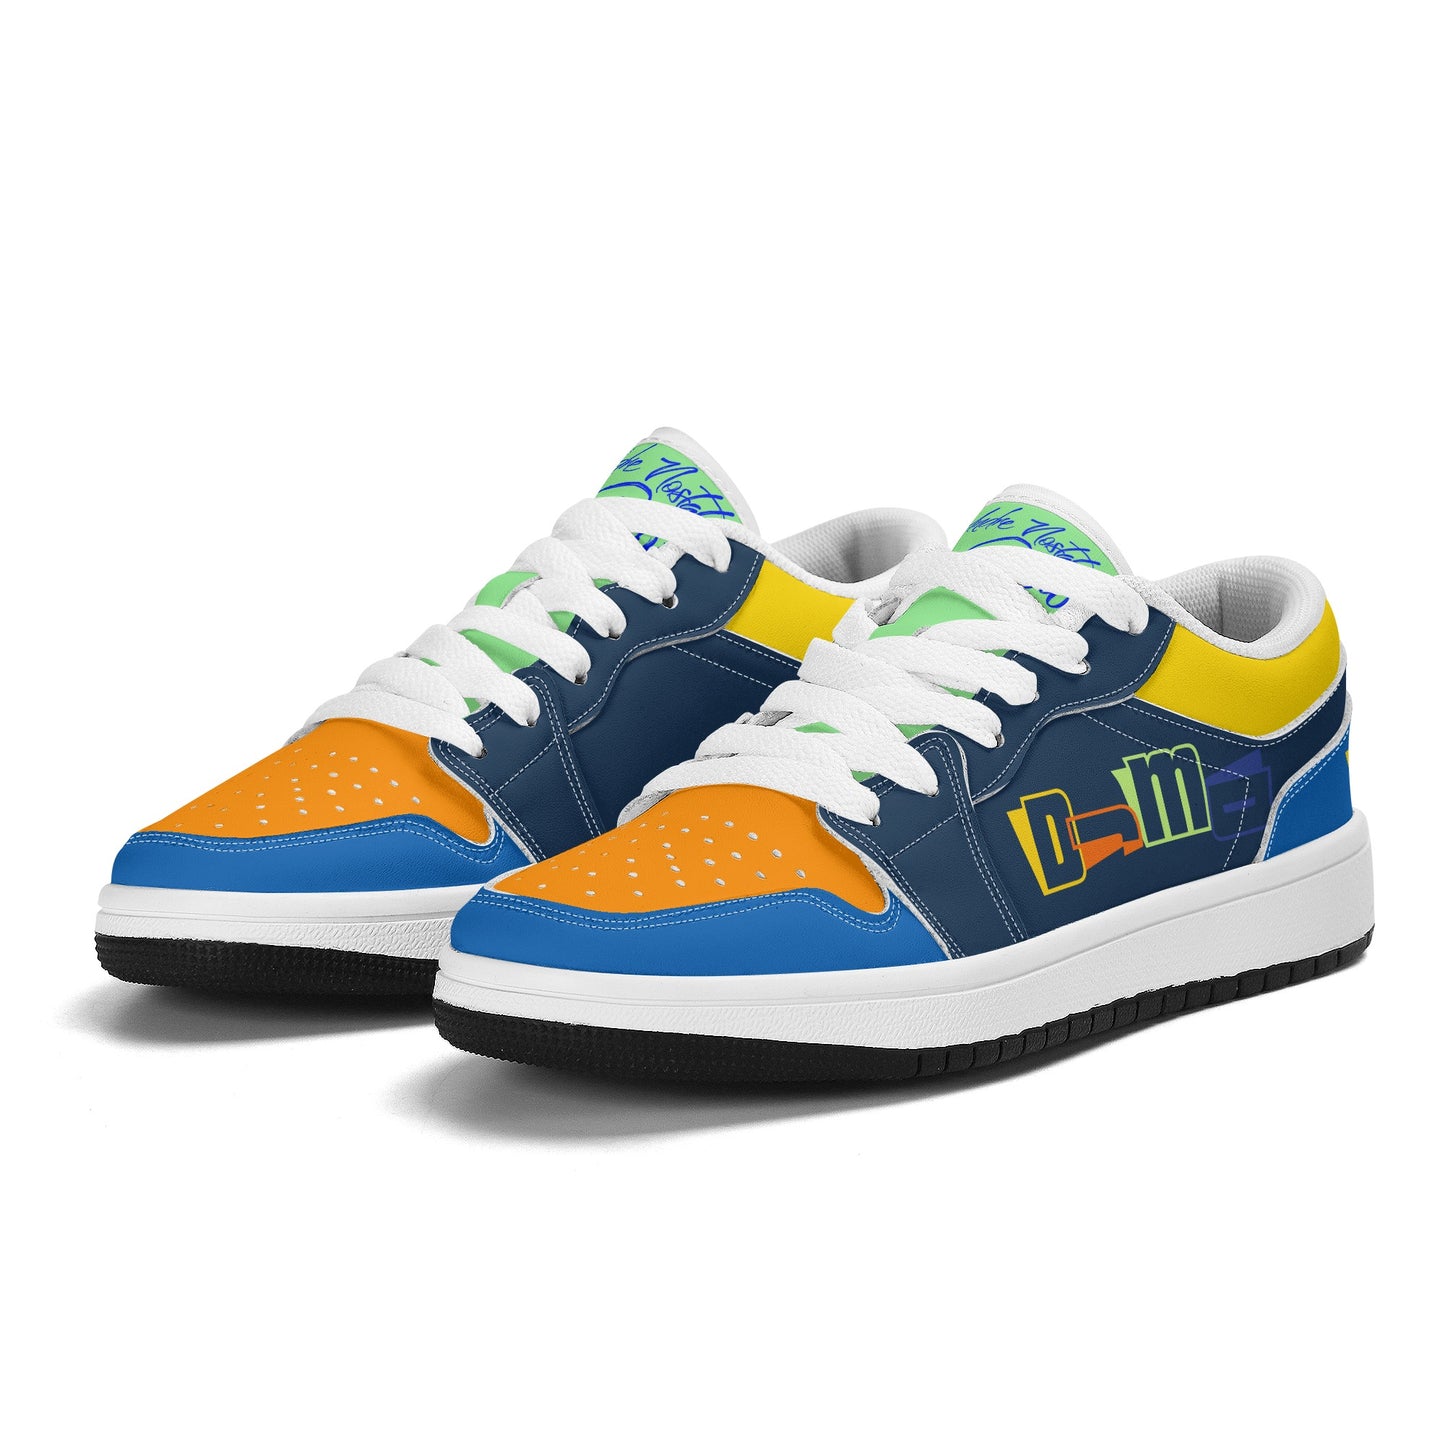 DJMD Childrens Low Top Leather Sneakers